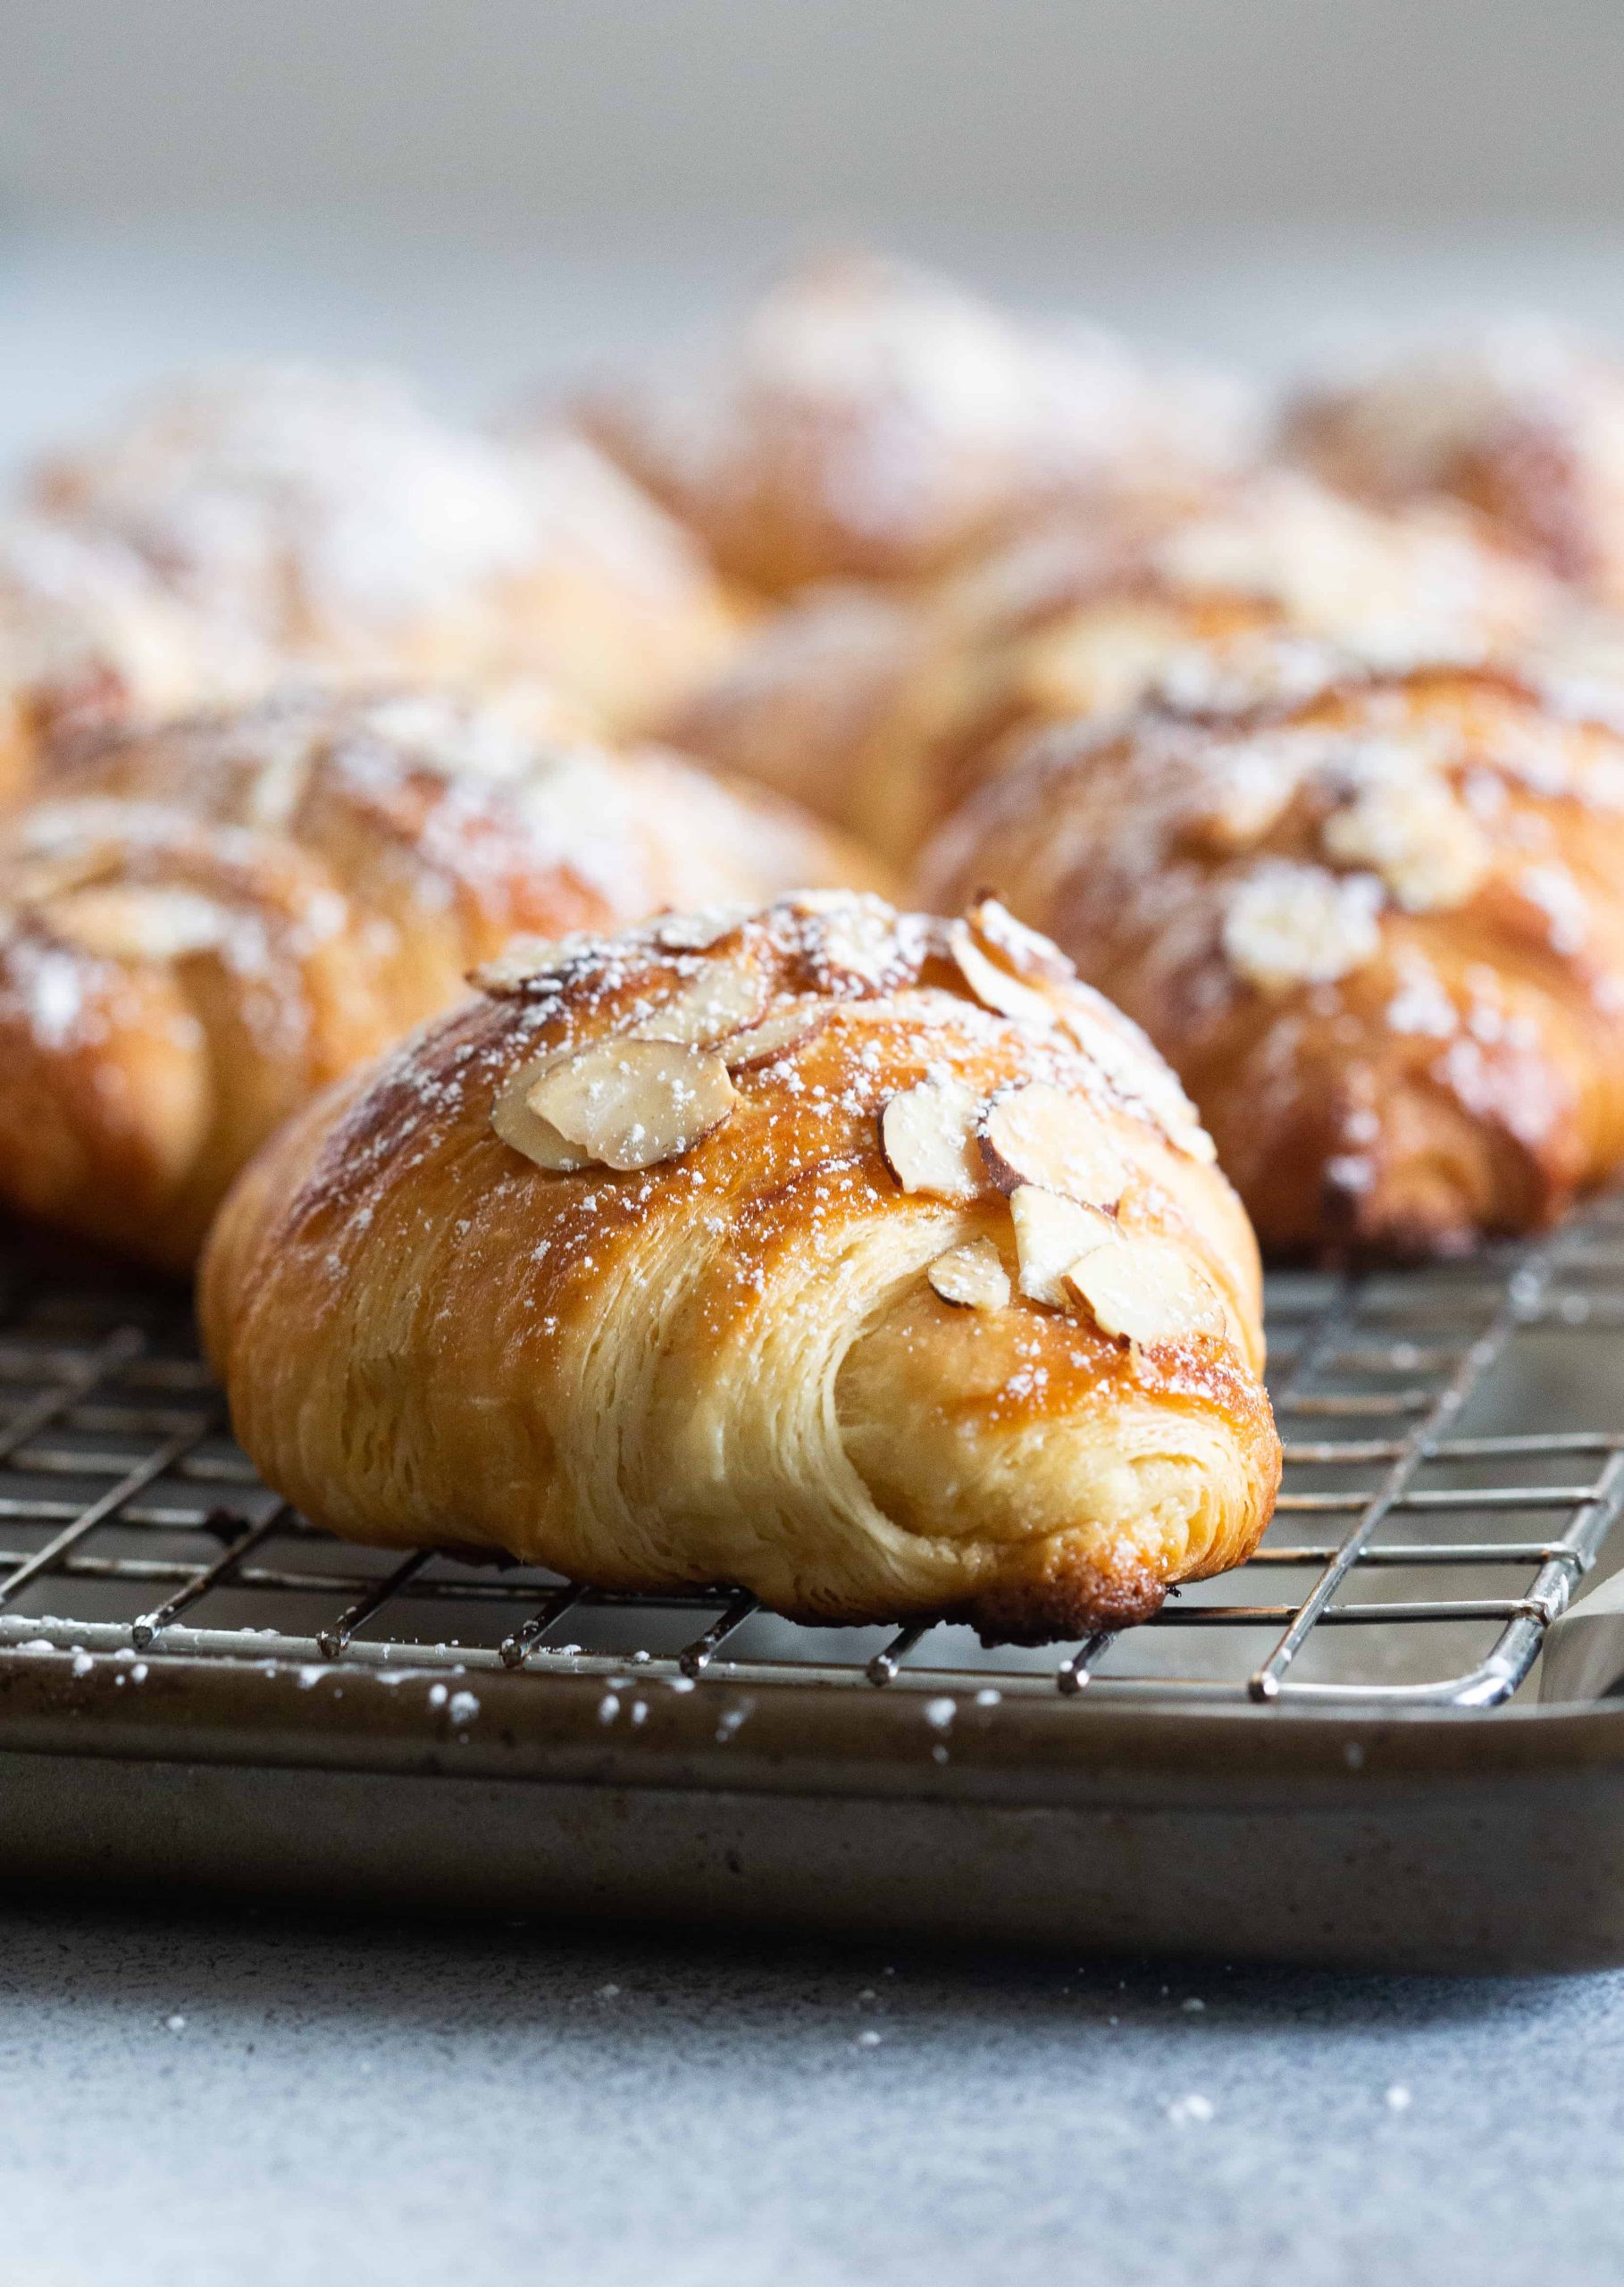 How To Make Classic Croissants At Home Recipe by Tasty